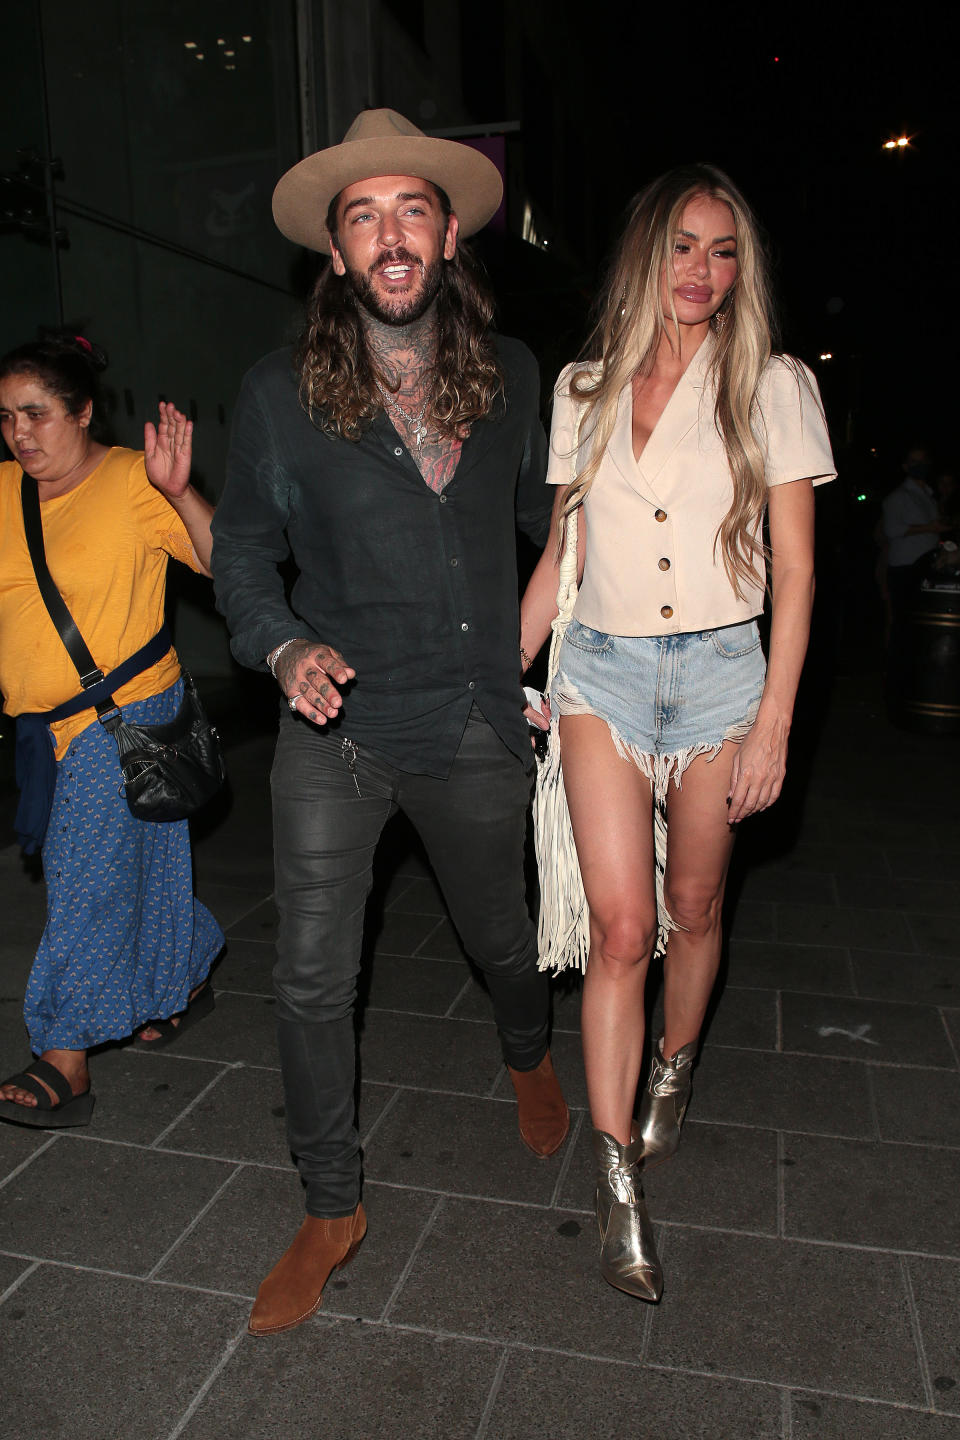 LONDON, ENGLAND - AUGUST 07:  Pete Wicks and Chloe Sims seen on a night out at Amazonico restaurant in Mayfair on August 07, 2020 in London, England. (Photo by Ricky Vigil/GC Images)